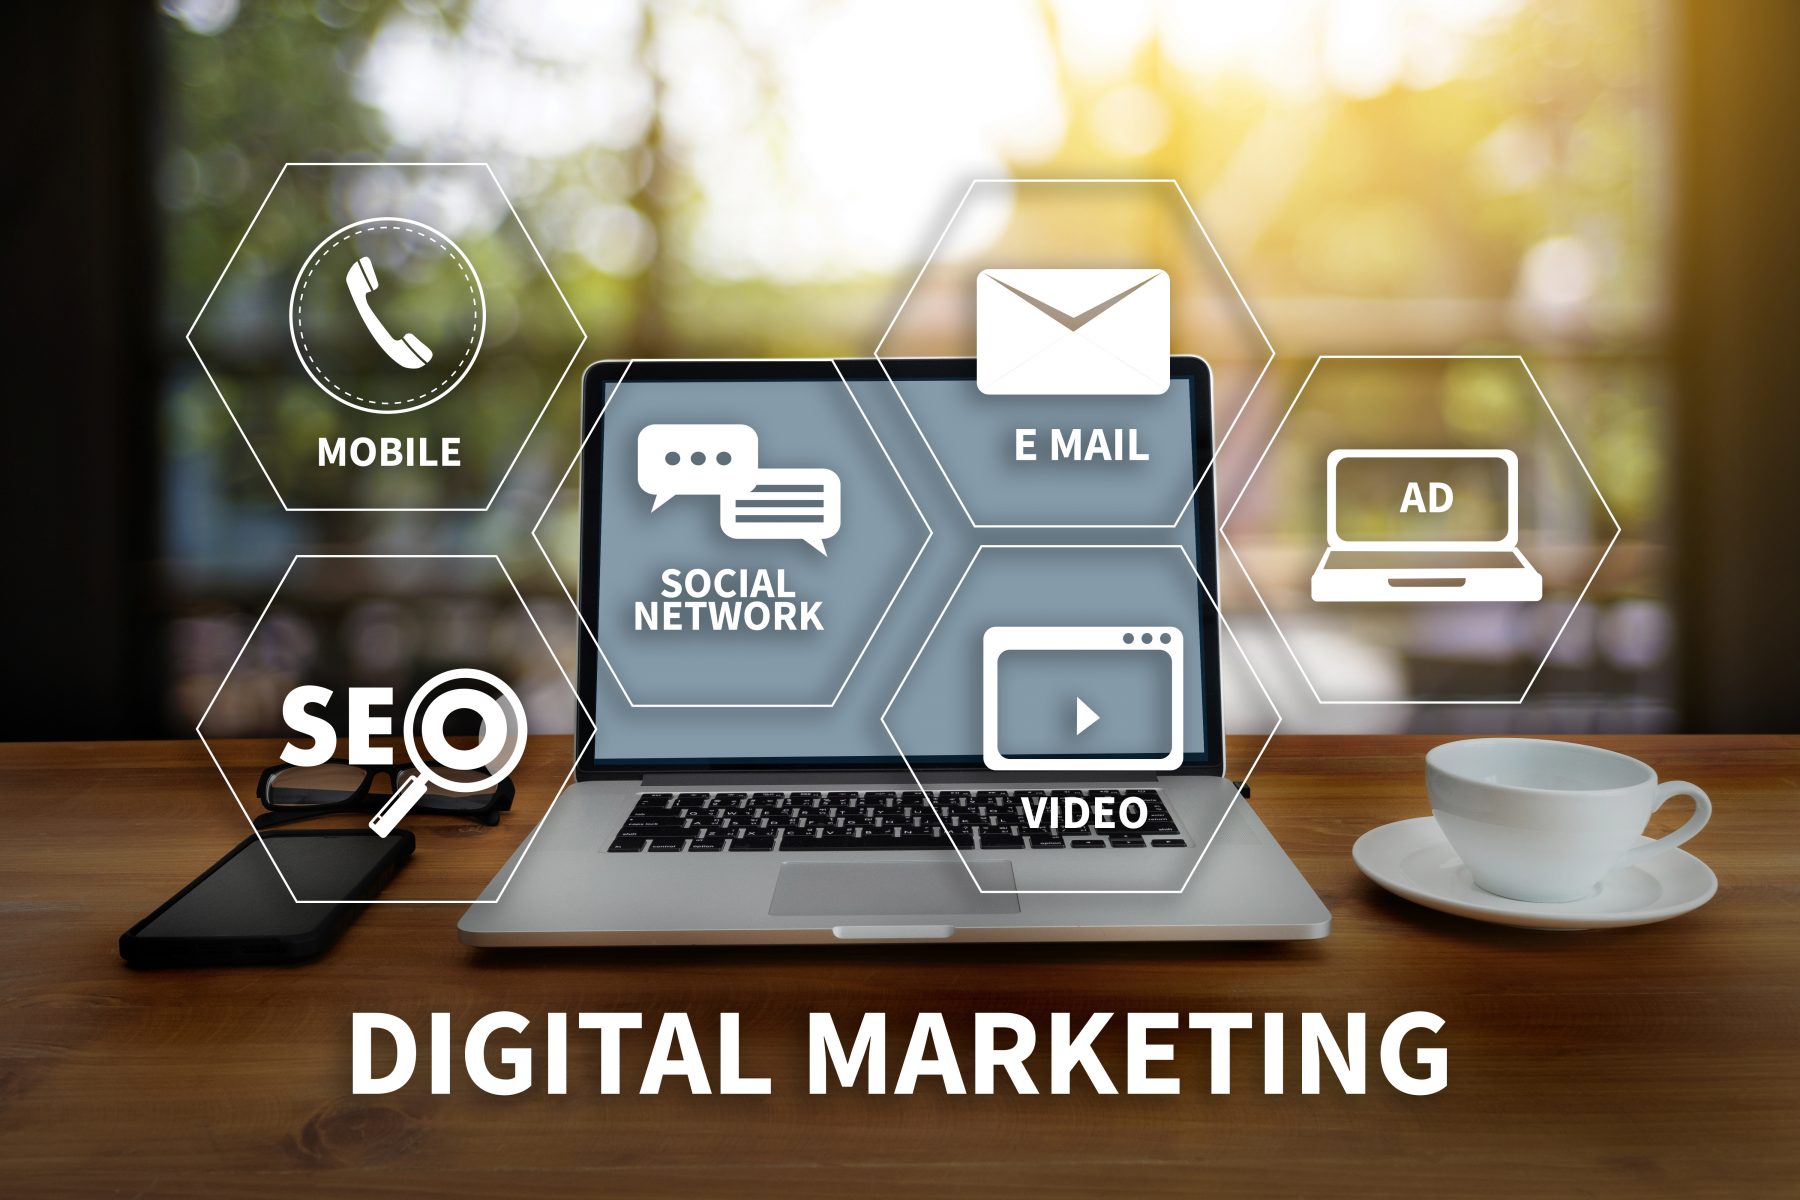 How to Choose the Best Digital Marketing Company for Your Business